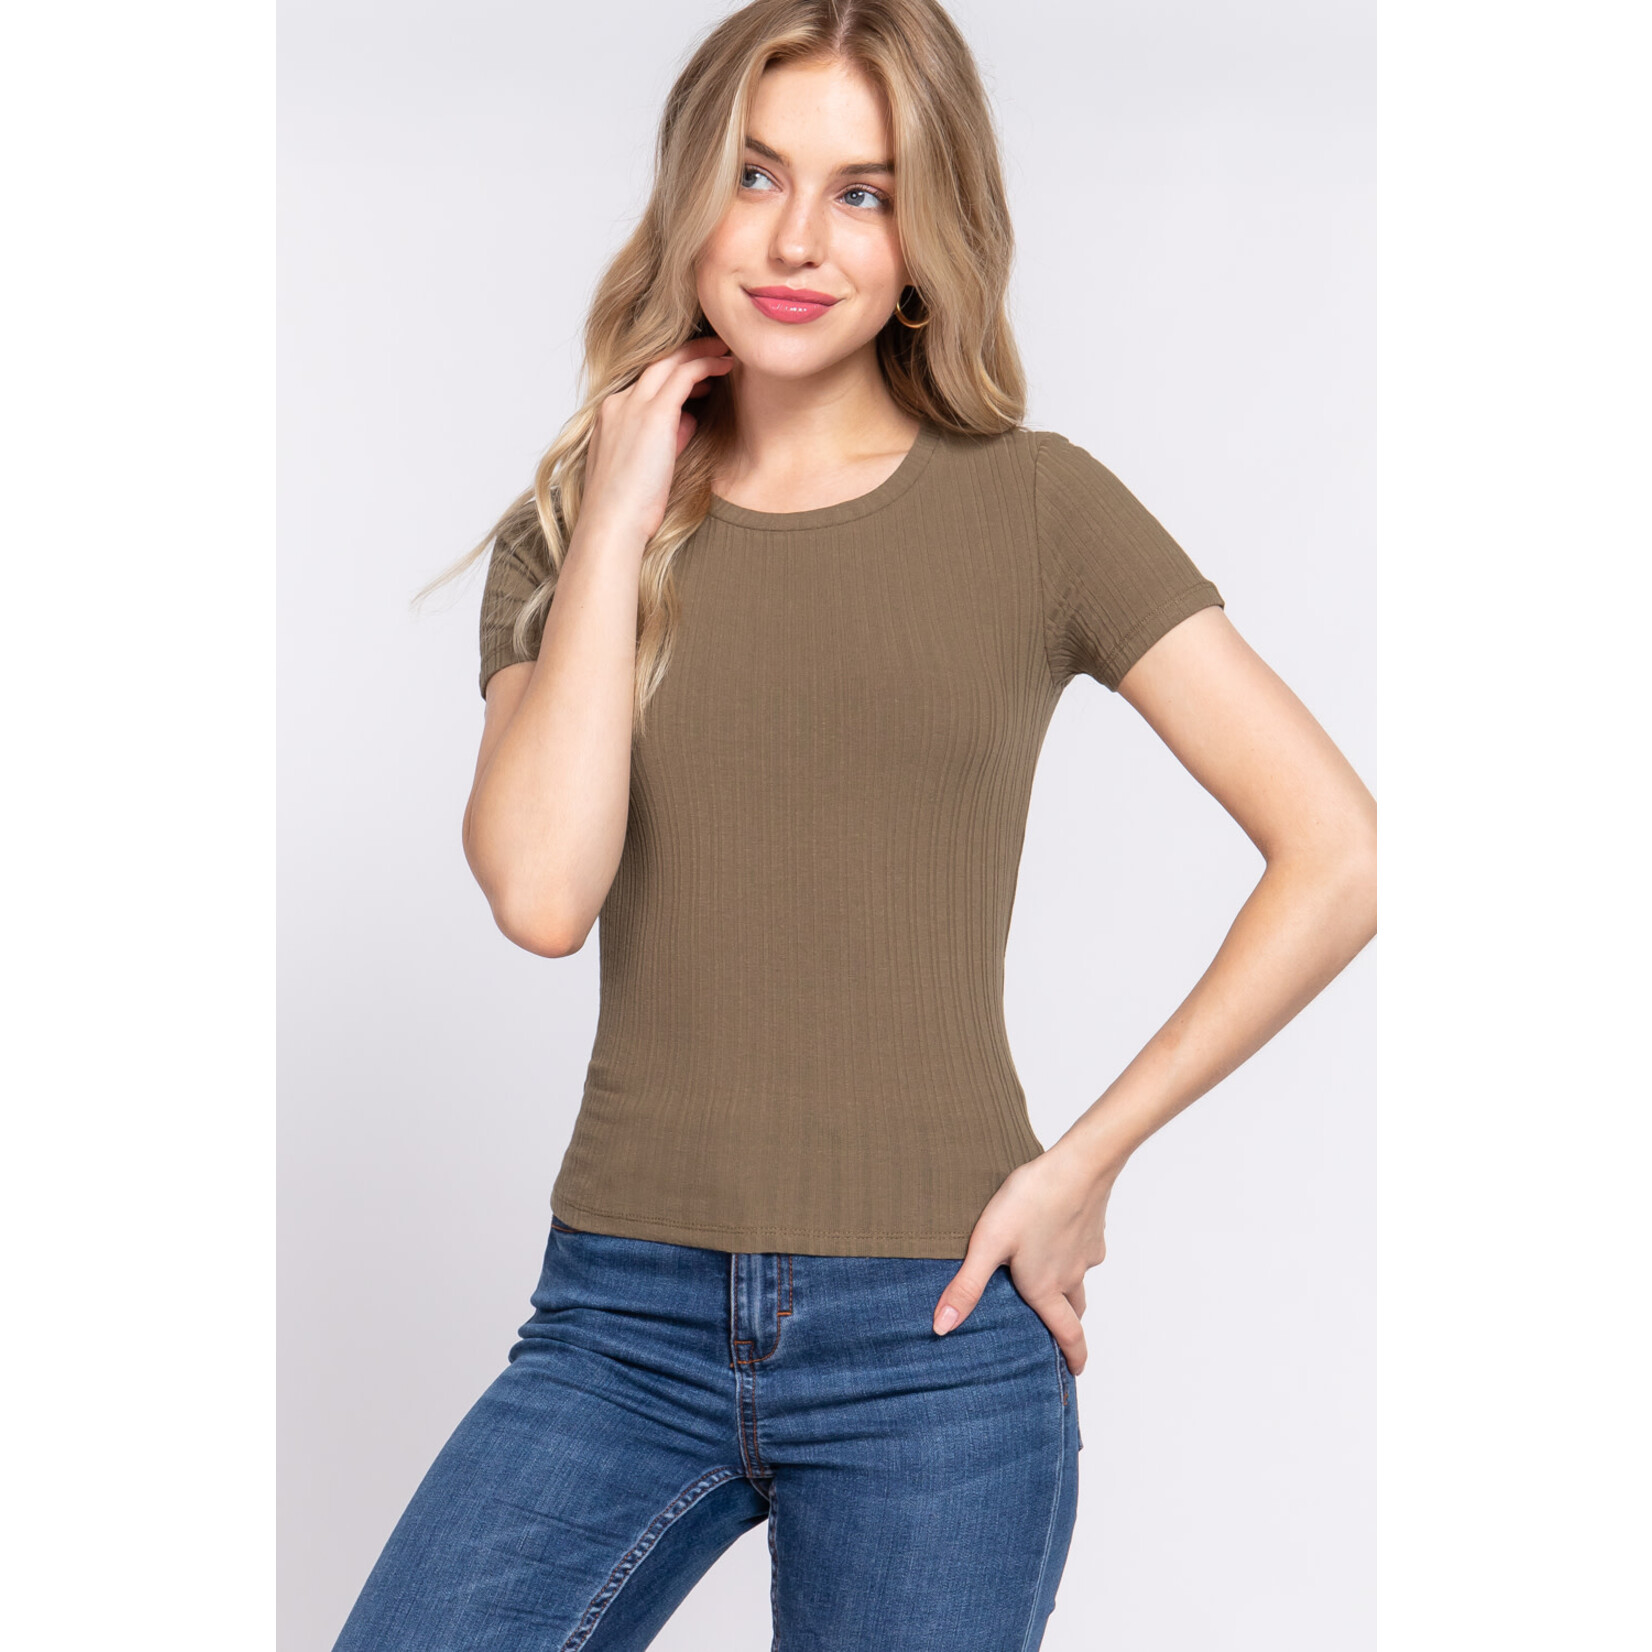 ACTIVE USA, INC. Active USA - Short Slv Crew Neck Variegated Knit Top -  T13600